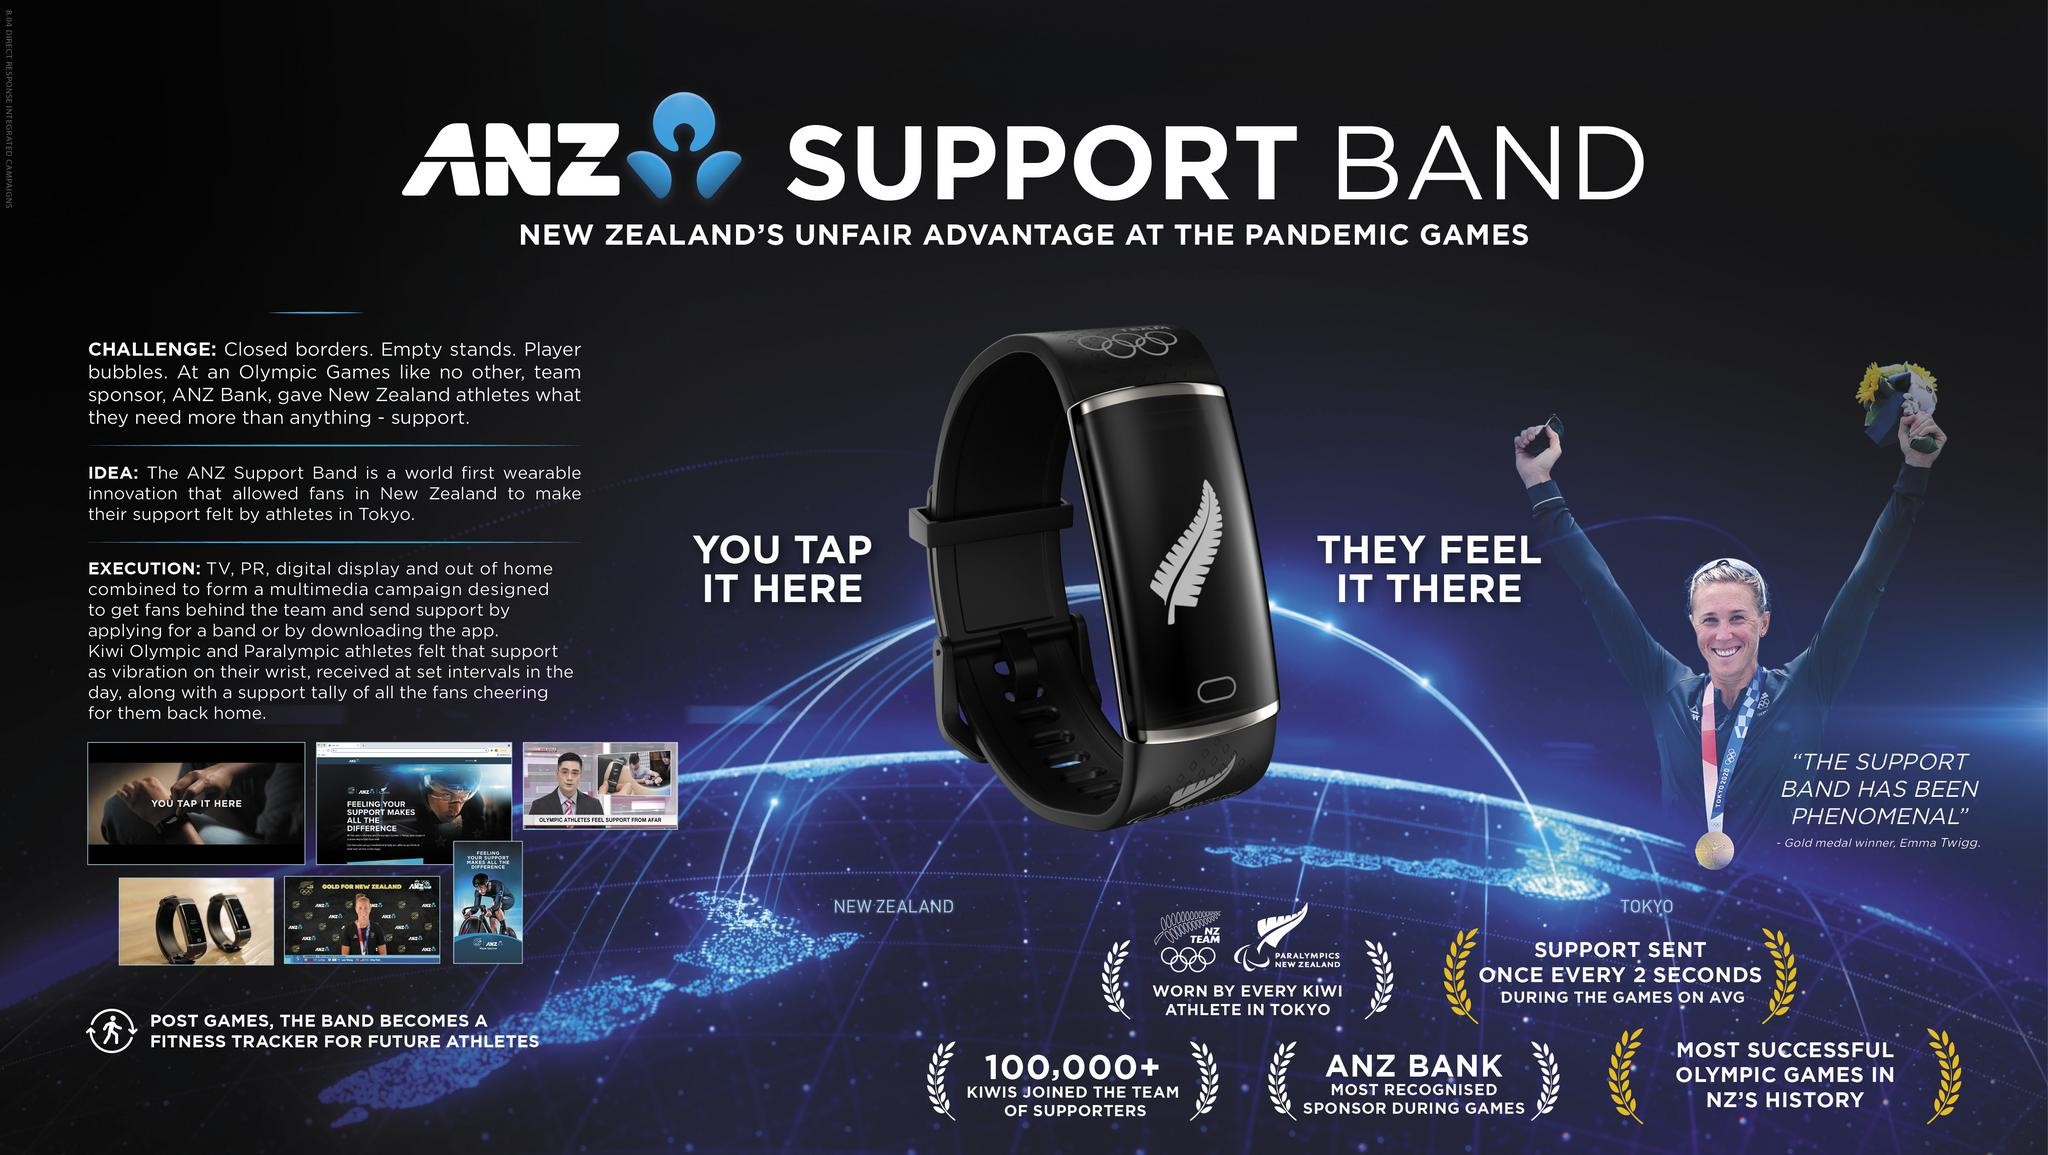 ANZ Support Band